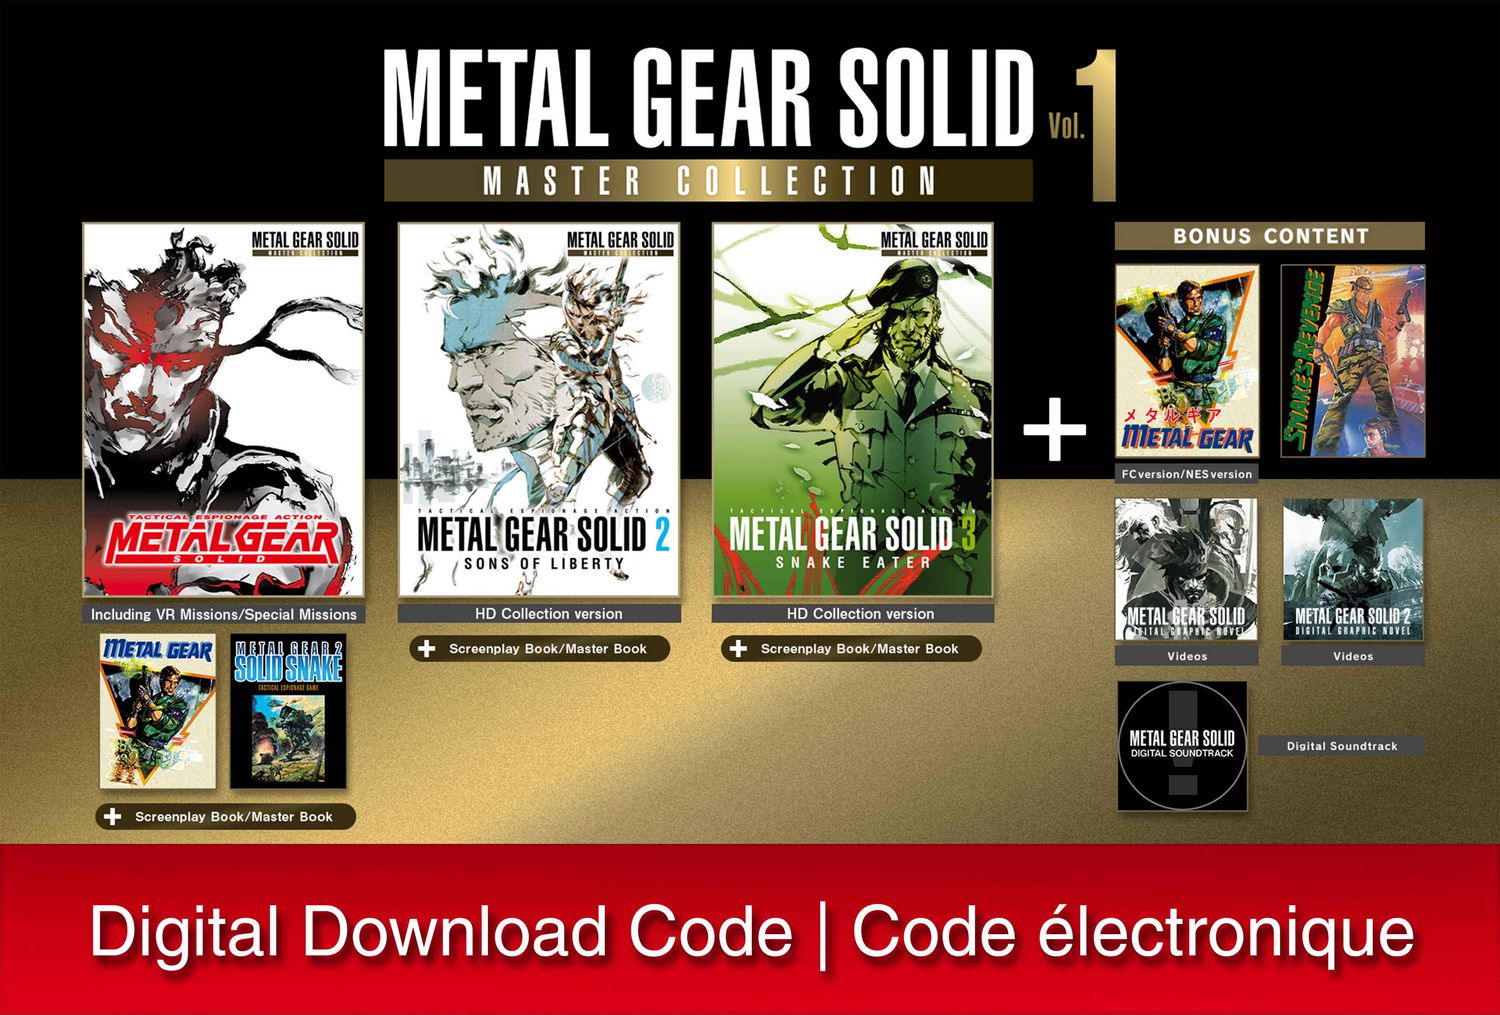 METAL GEAR SOLID: MASTER COLLECTION Vol. 1 - Nintendo Switch